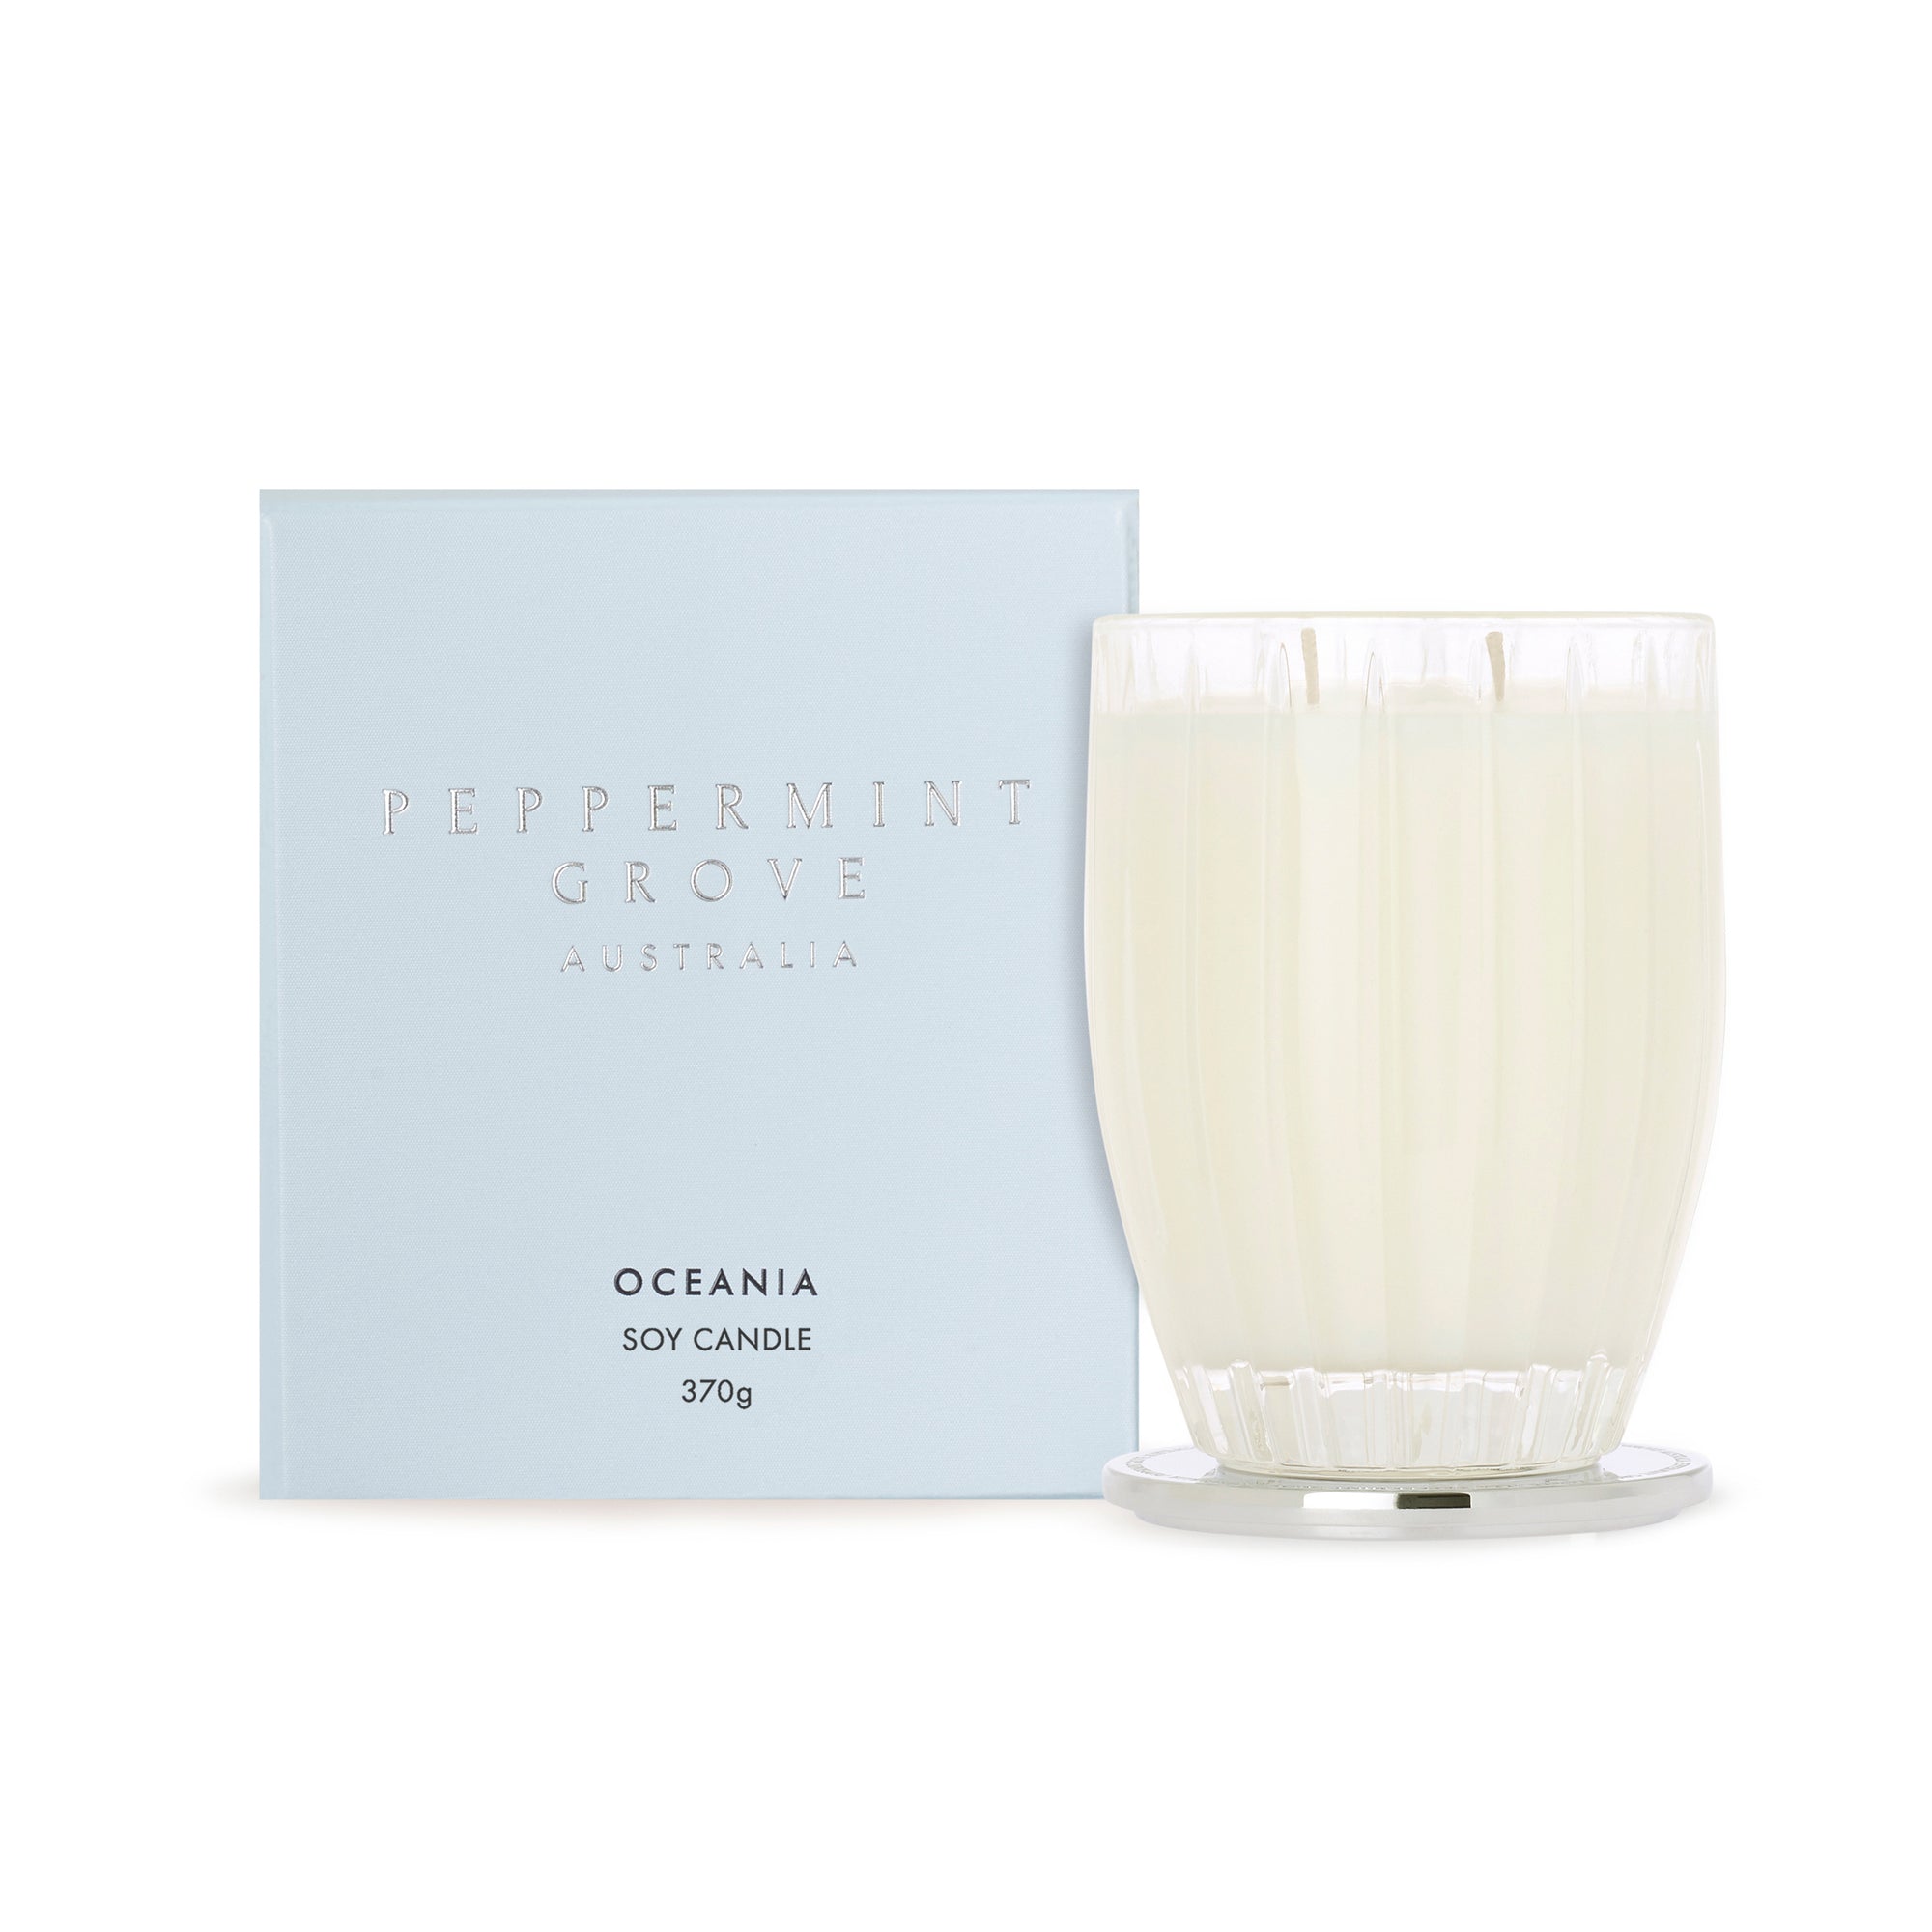 Peppermint Grove Oceania Large Soy Candle 370g